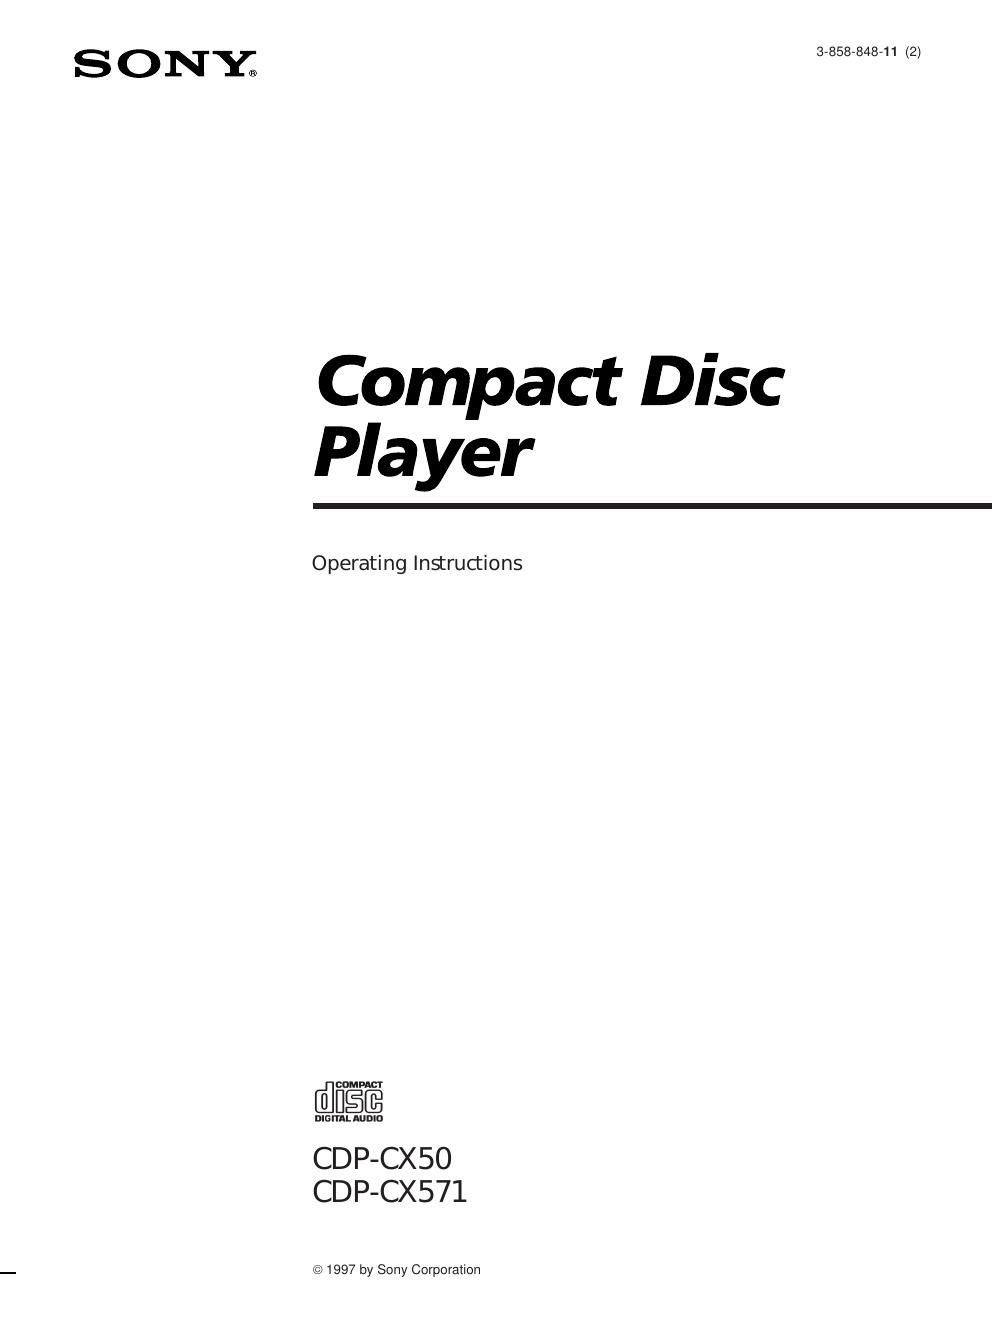 sony cdp cx 571 owners manual